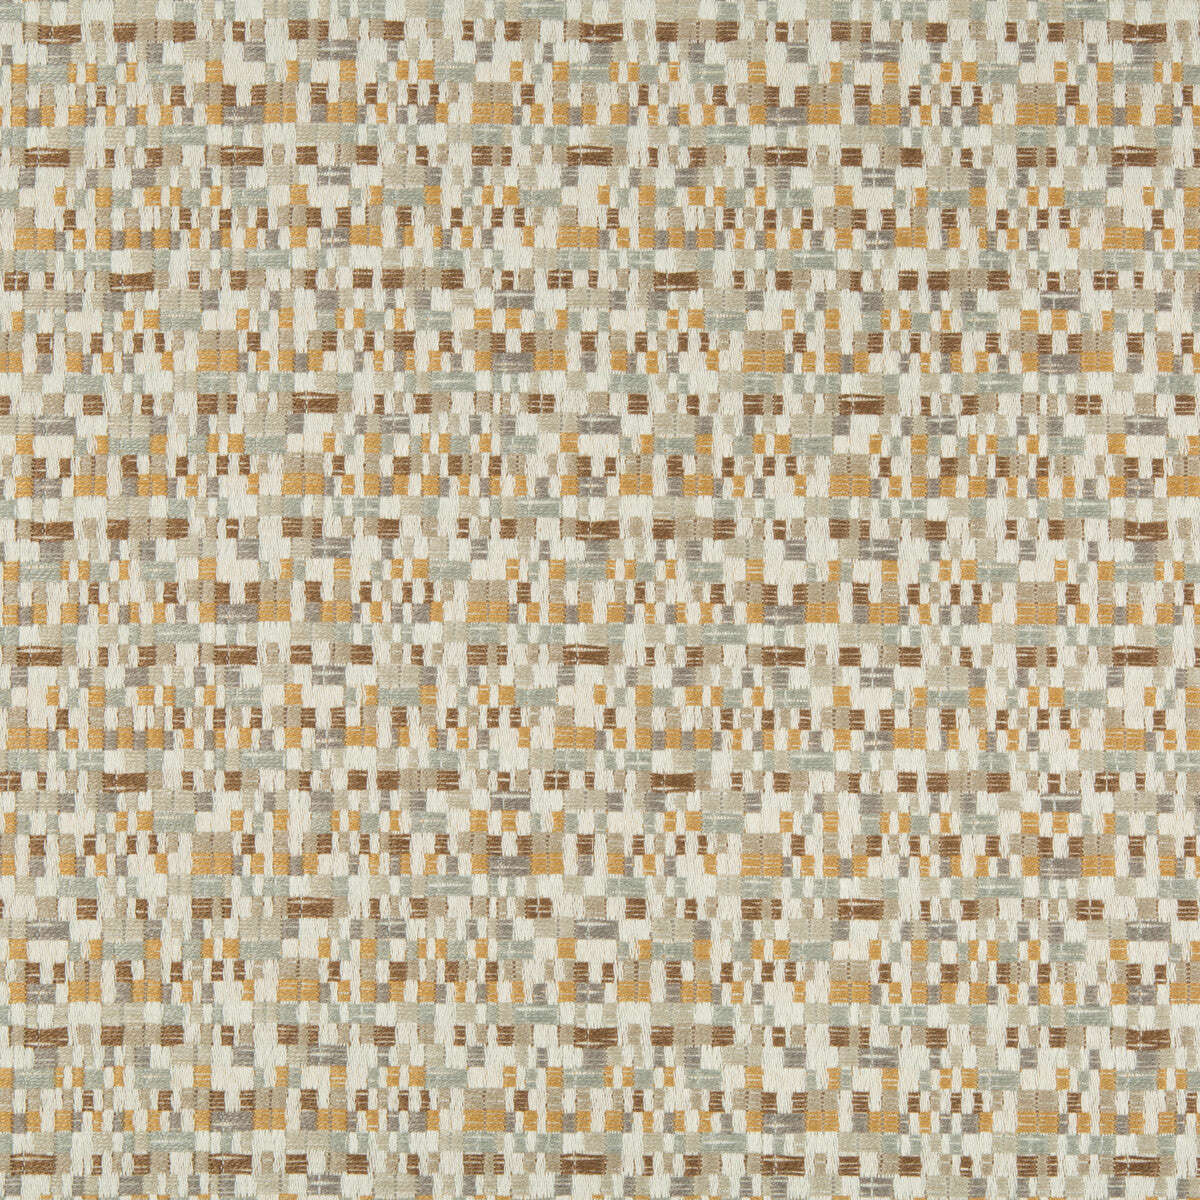 Kravet Design fabric in 34697-611 color - pattern 34697.611.0 - by Kravet Design in the Crypton Home collection